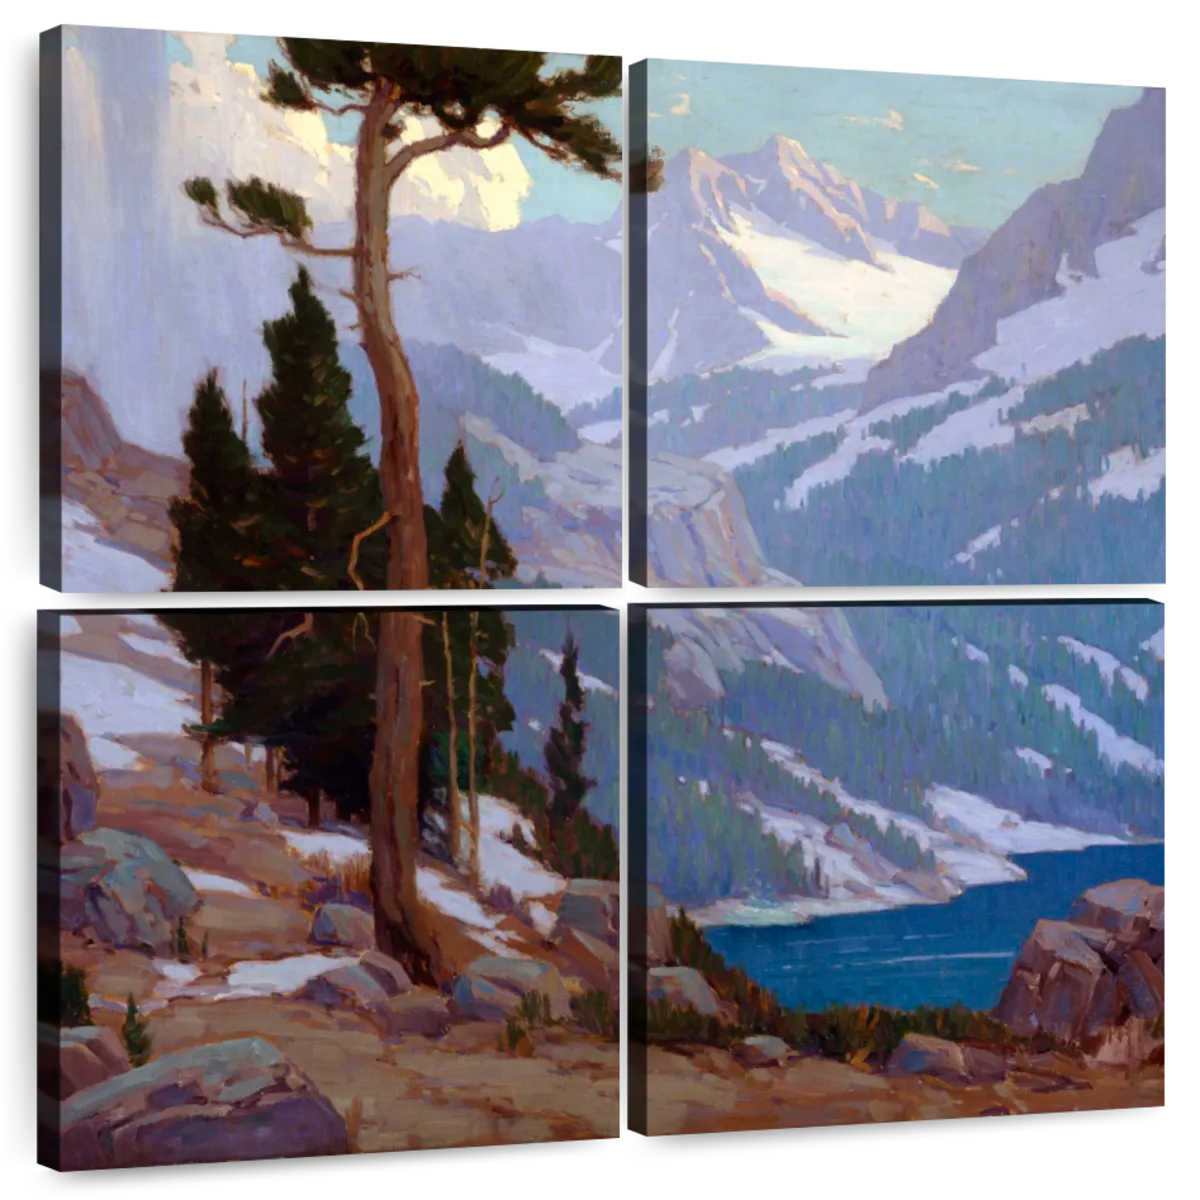 https://cdn.shopify.com/s/files/1/1568/8443/products/z1x_art_nlf_layout_4_square_south-lake-tahoe-4-piece-wall-art.webp?v=1668779258